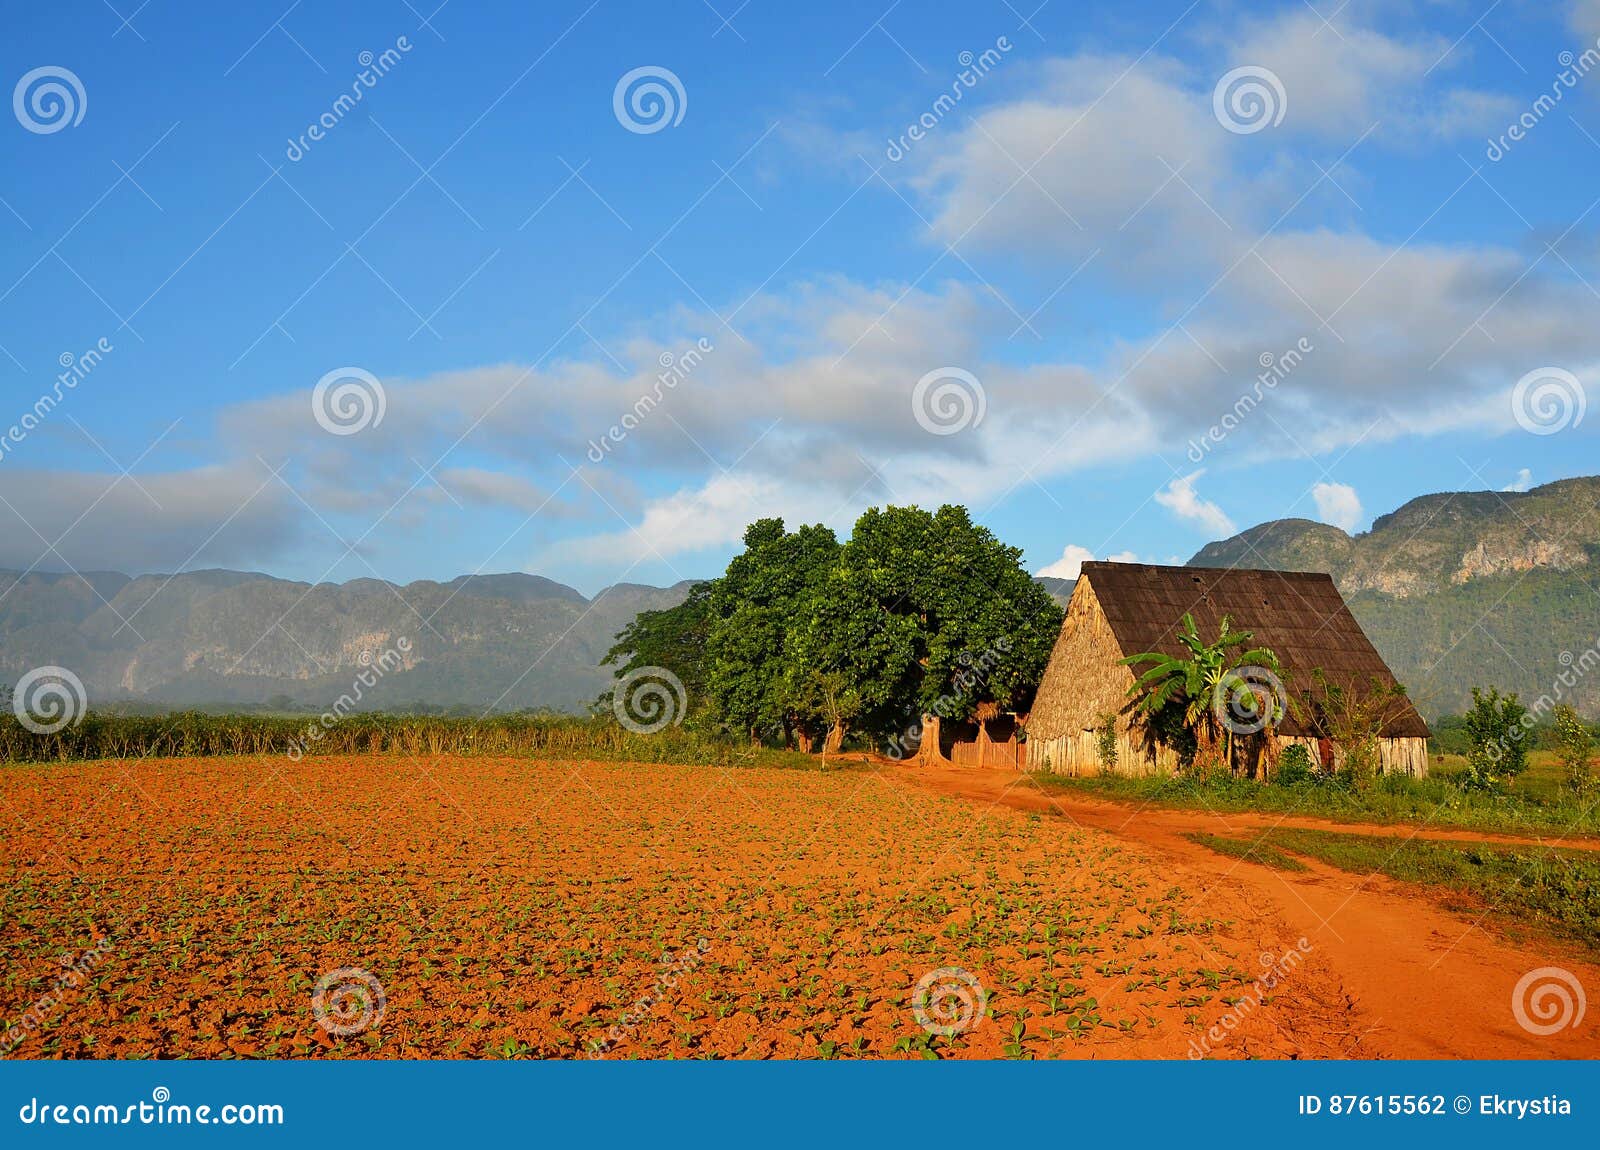 vinales national park and its typical tobacco house, cuba